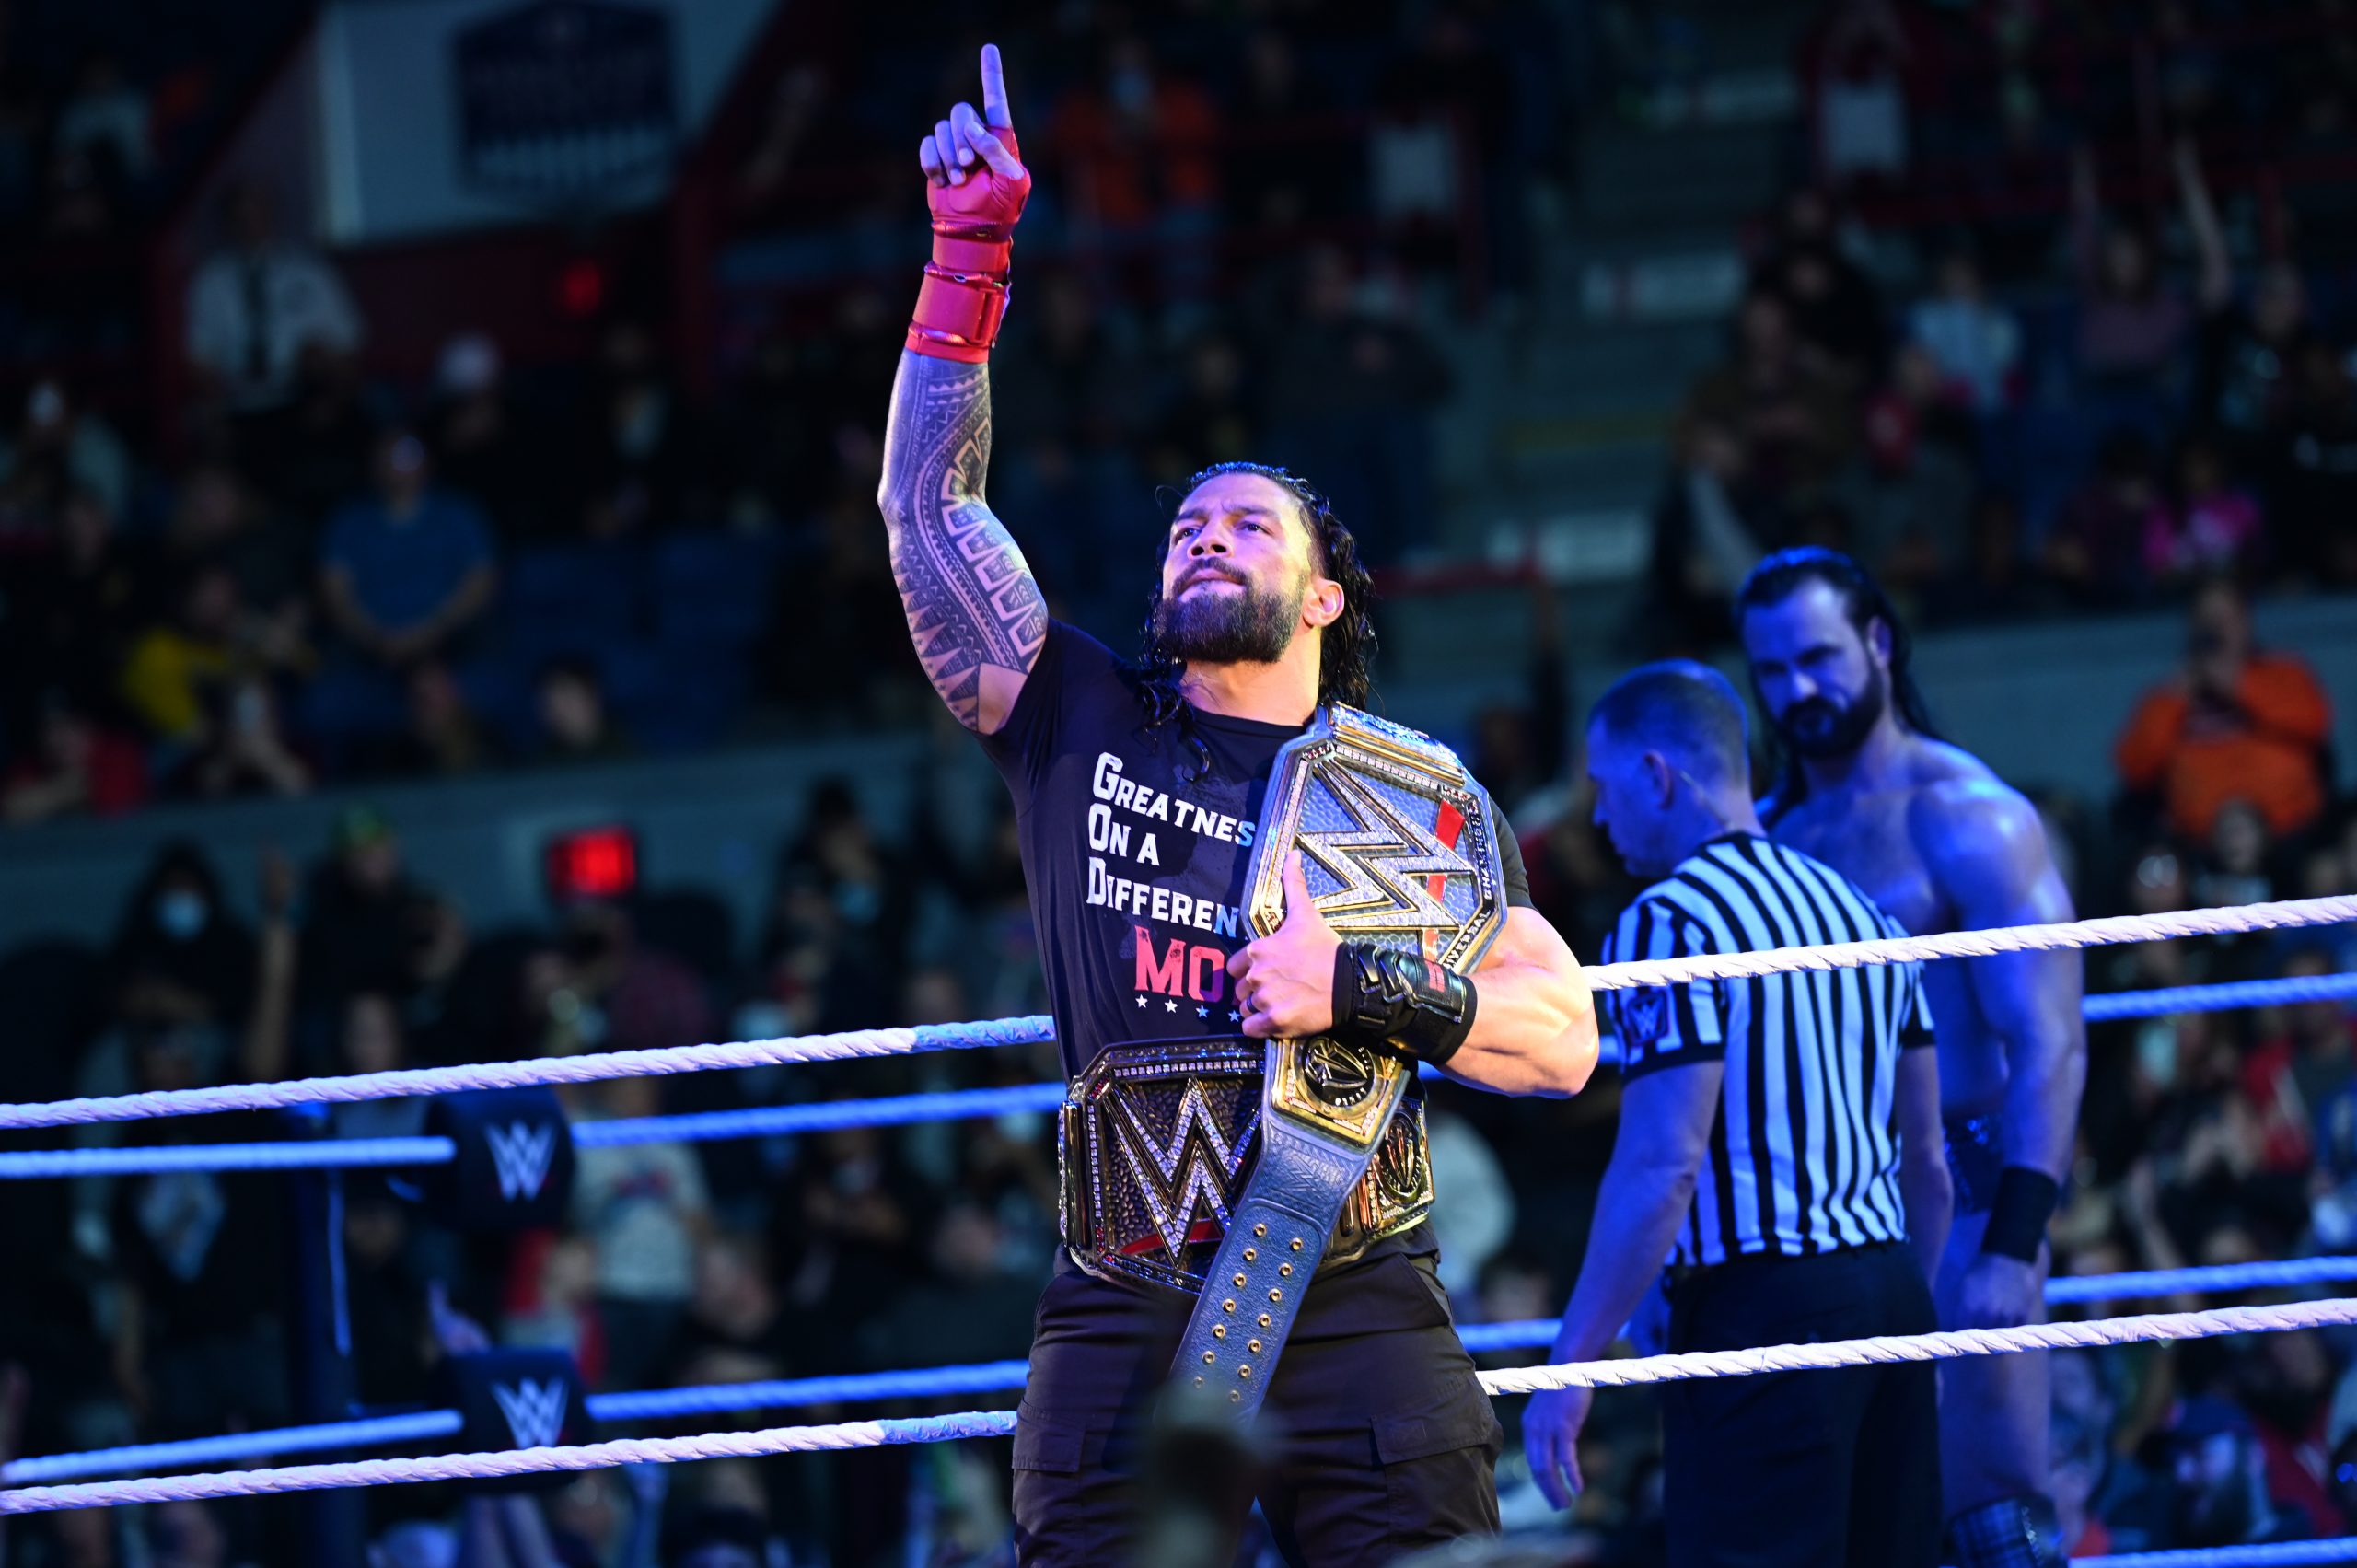 Syracuse wrestling fans brought the energy, the WWE superstars brought